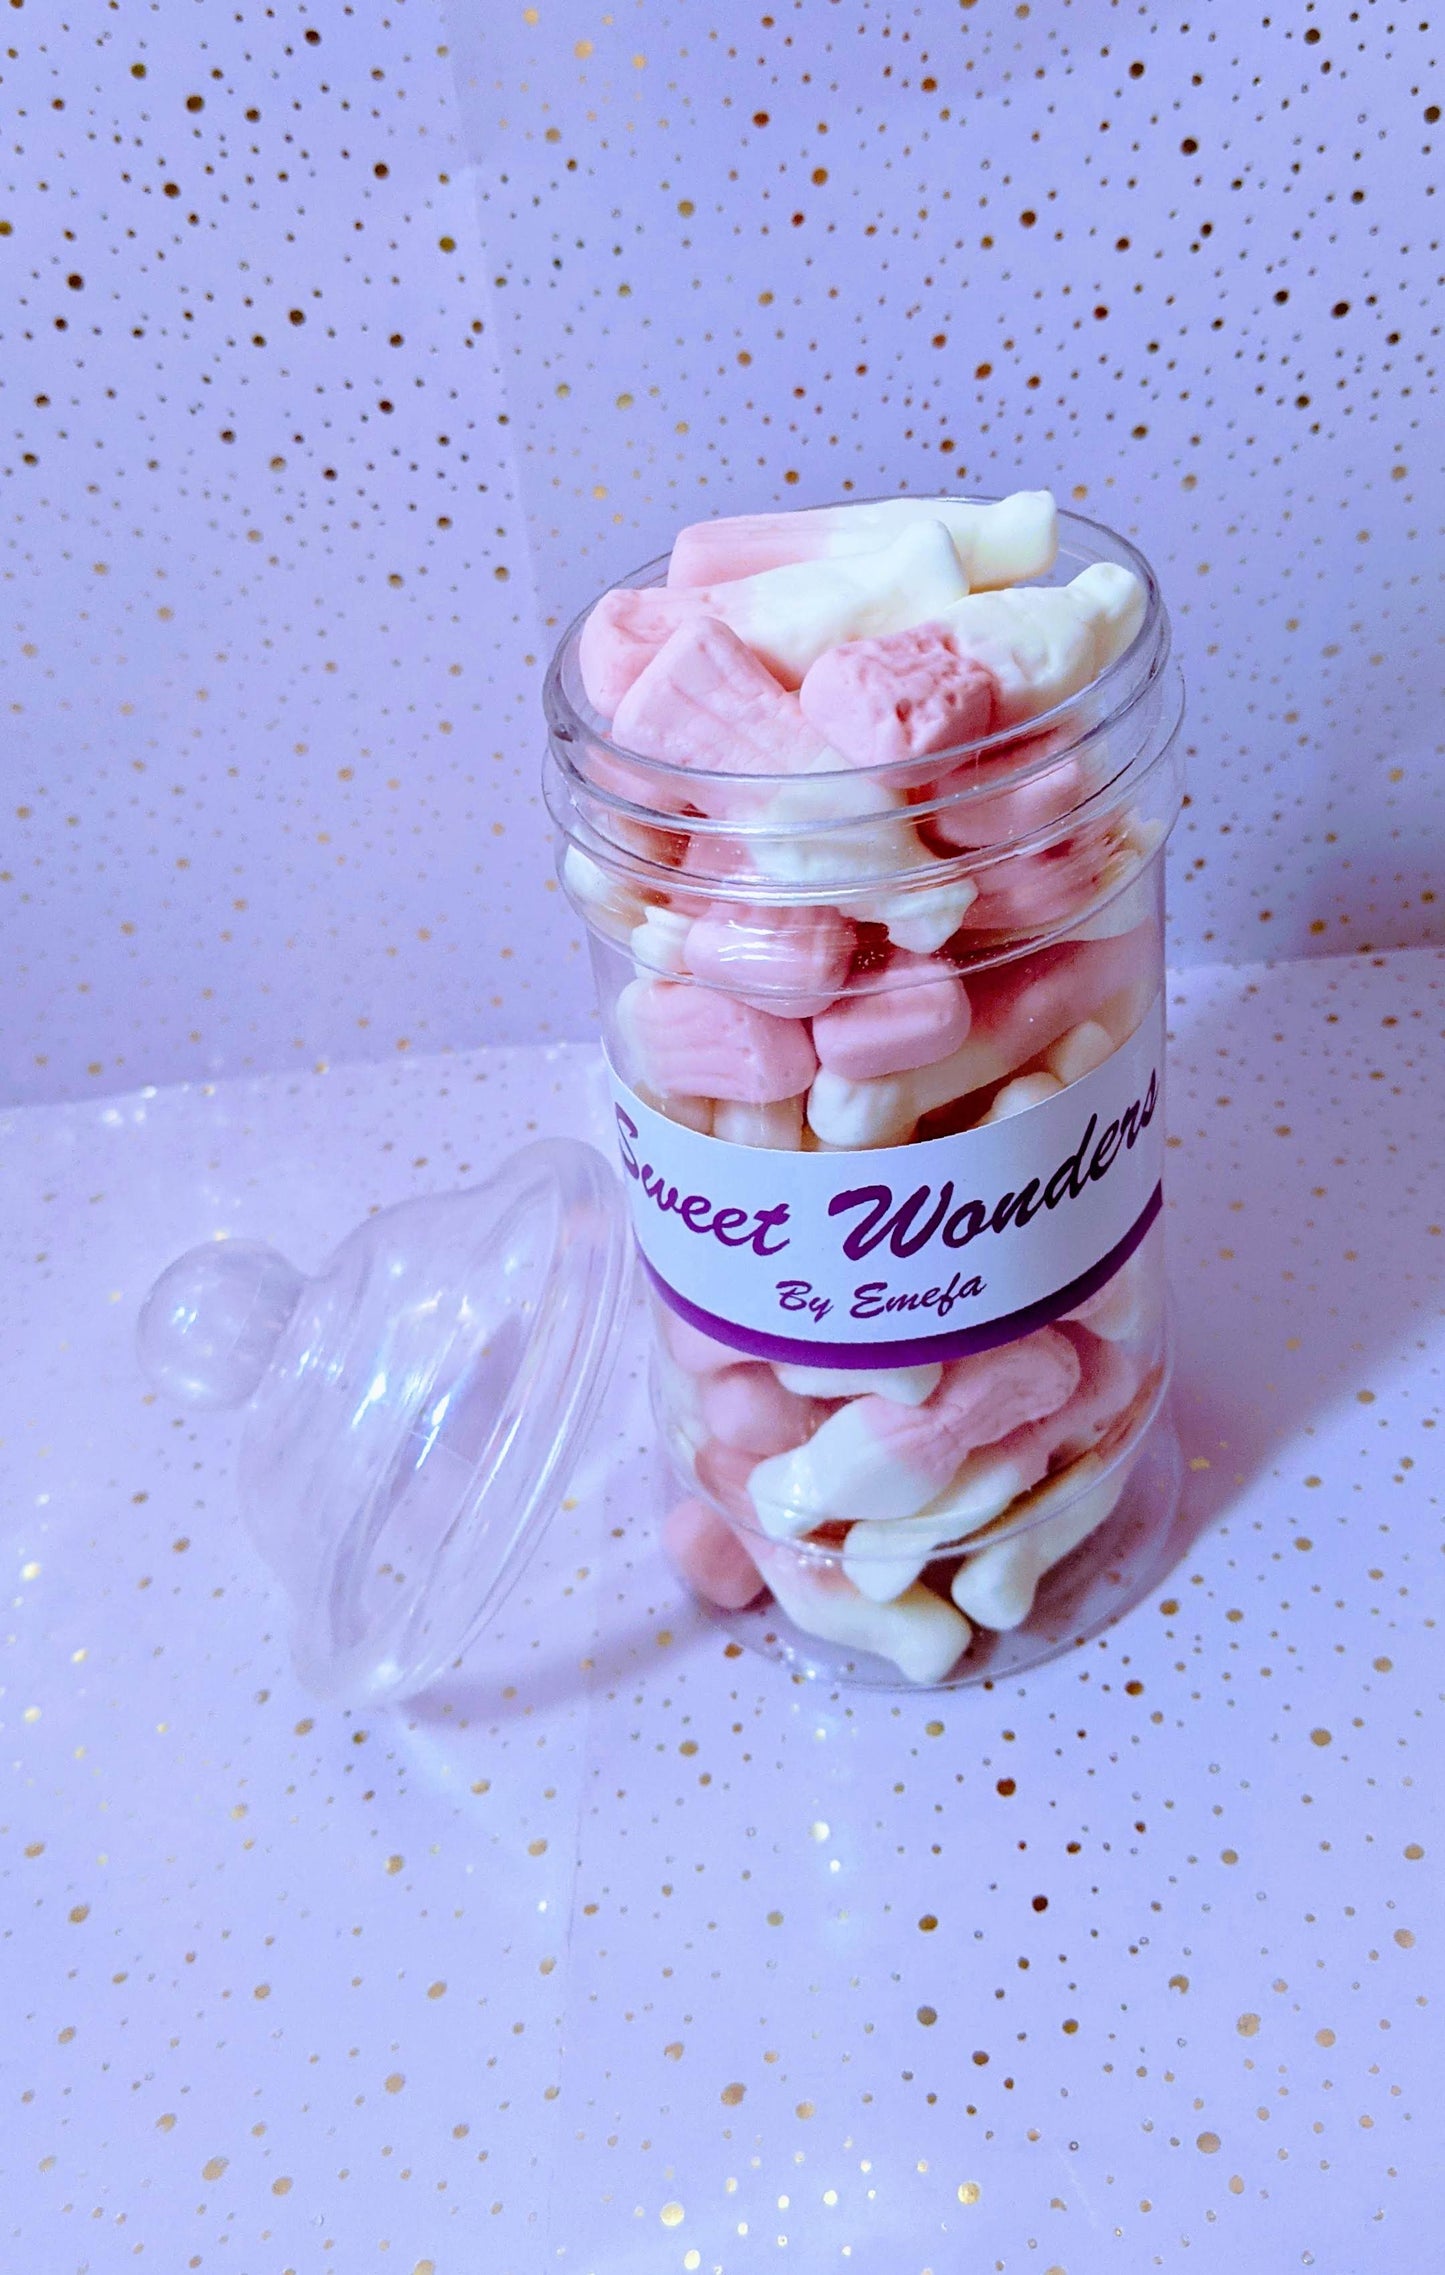 Multi customized Sweets in Jars with Free Personalized Message from best online seller in UK